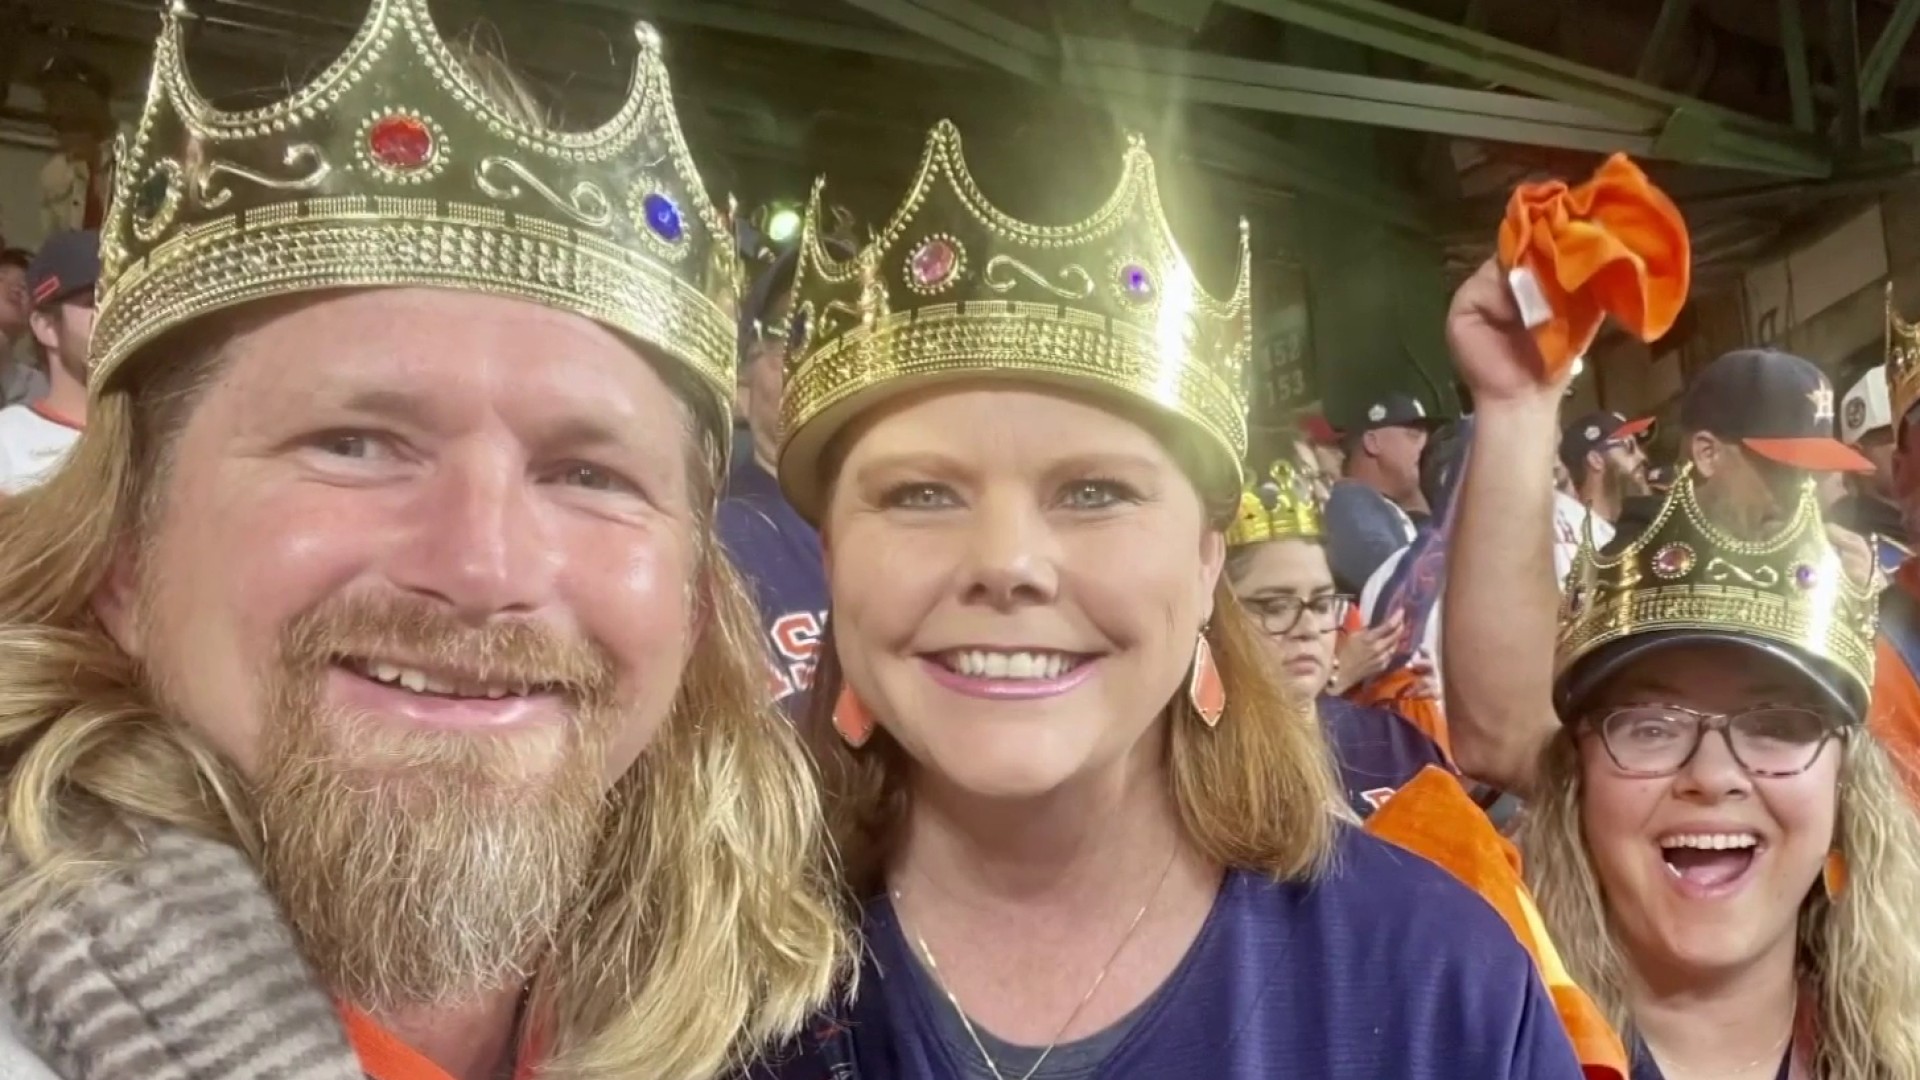 Astros fans bring hundreds of gold crowns to playoff games for King Tuck